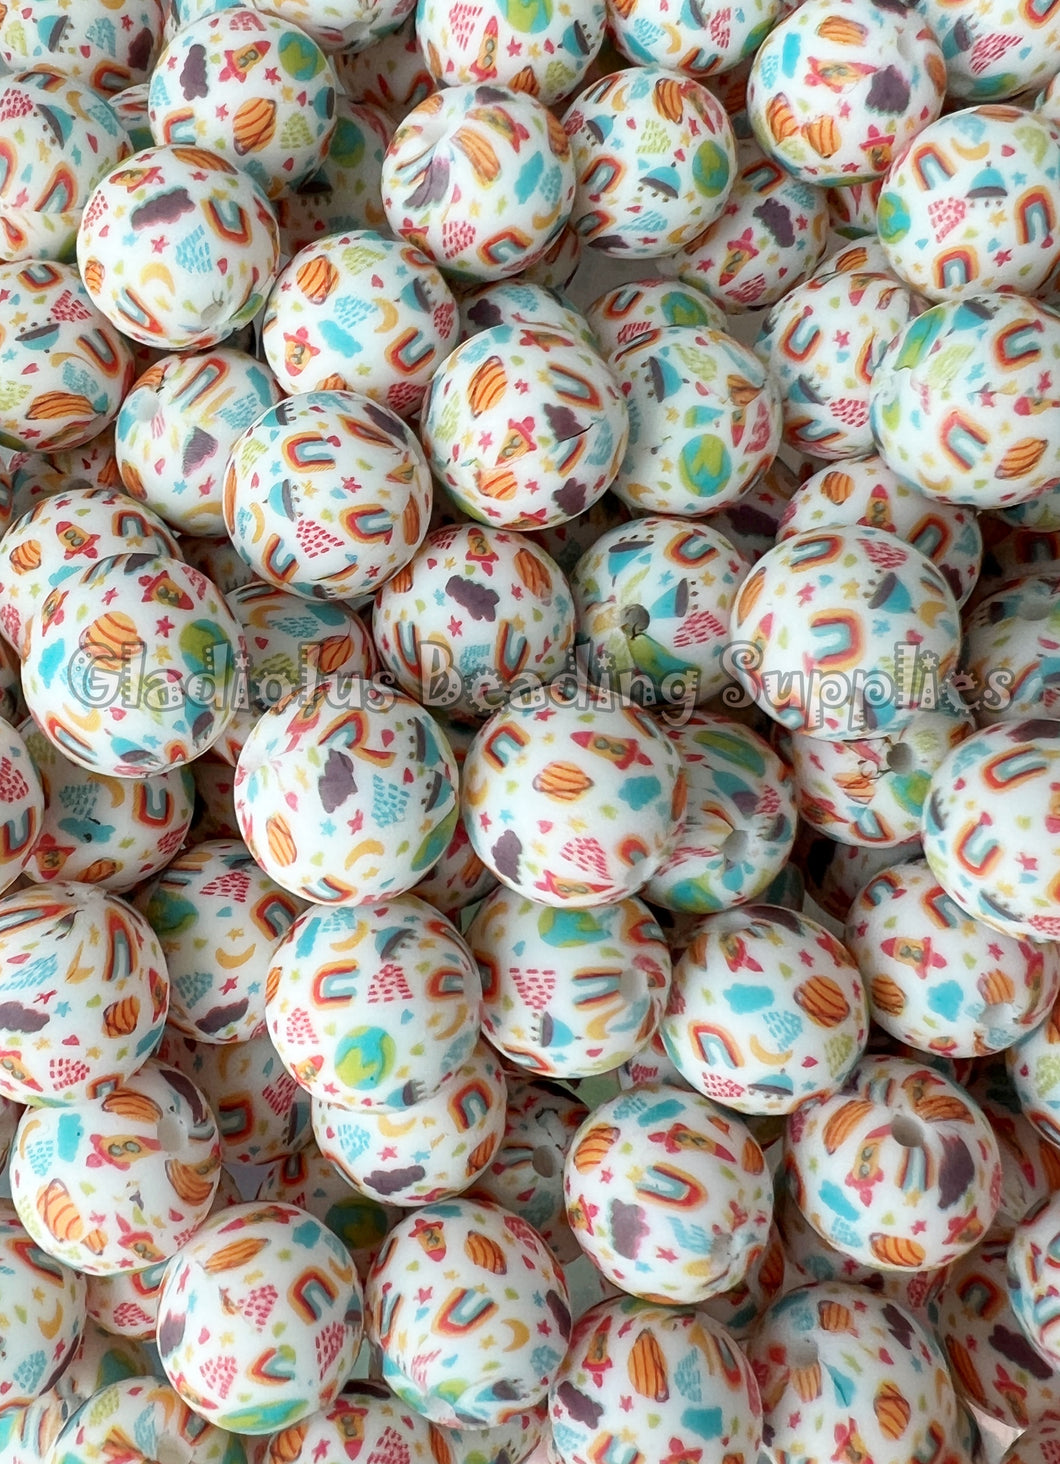 15mm Colorful Print Silicone Bead, Loose Beads.